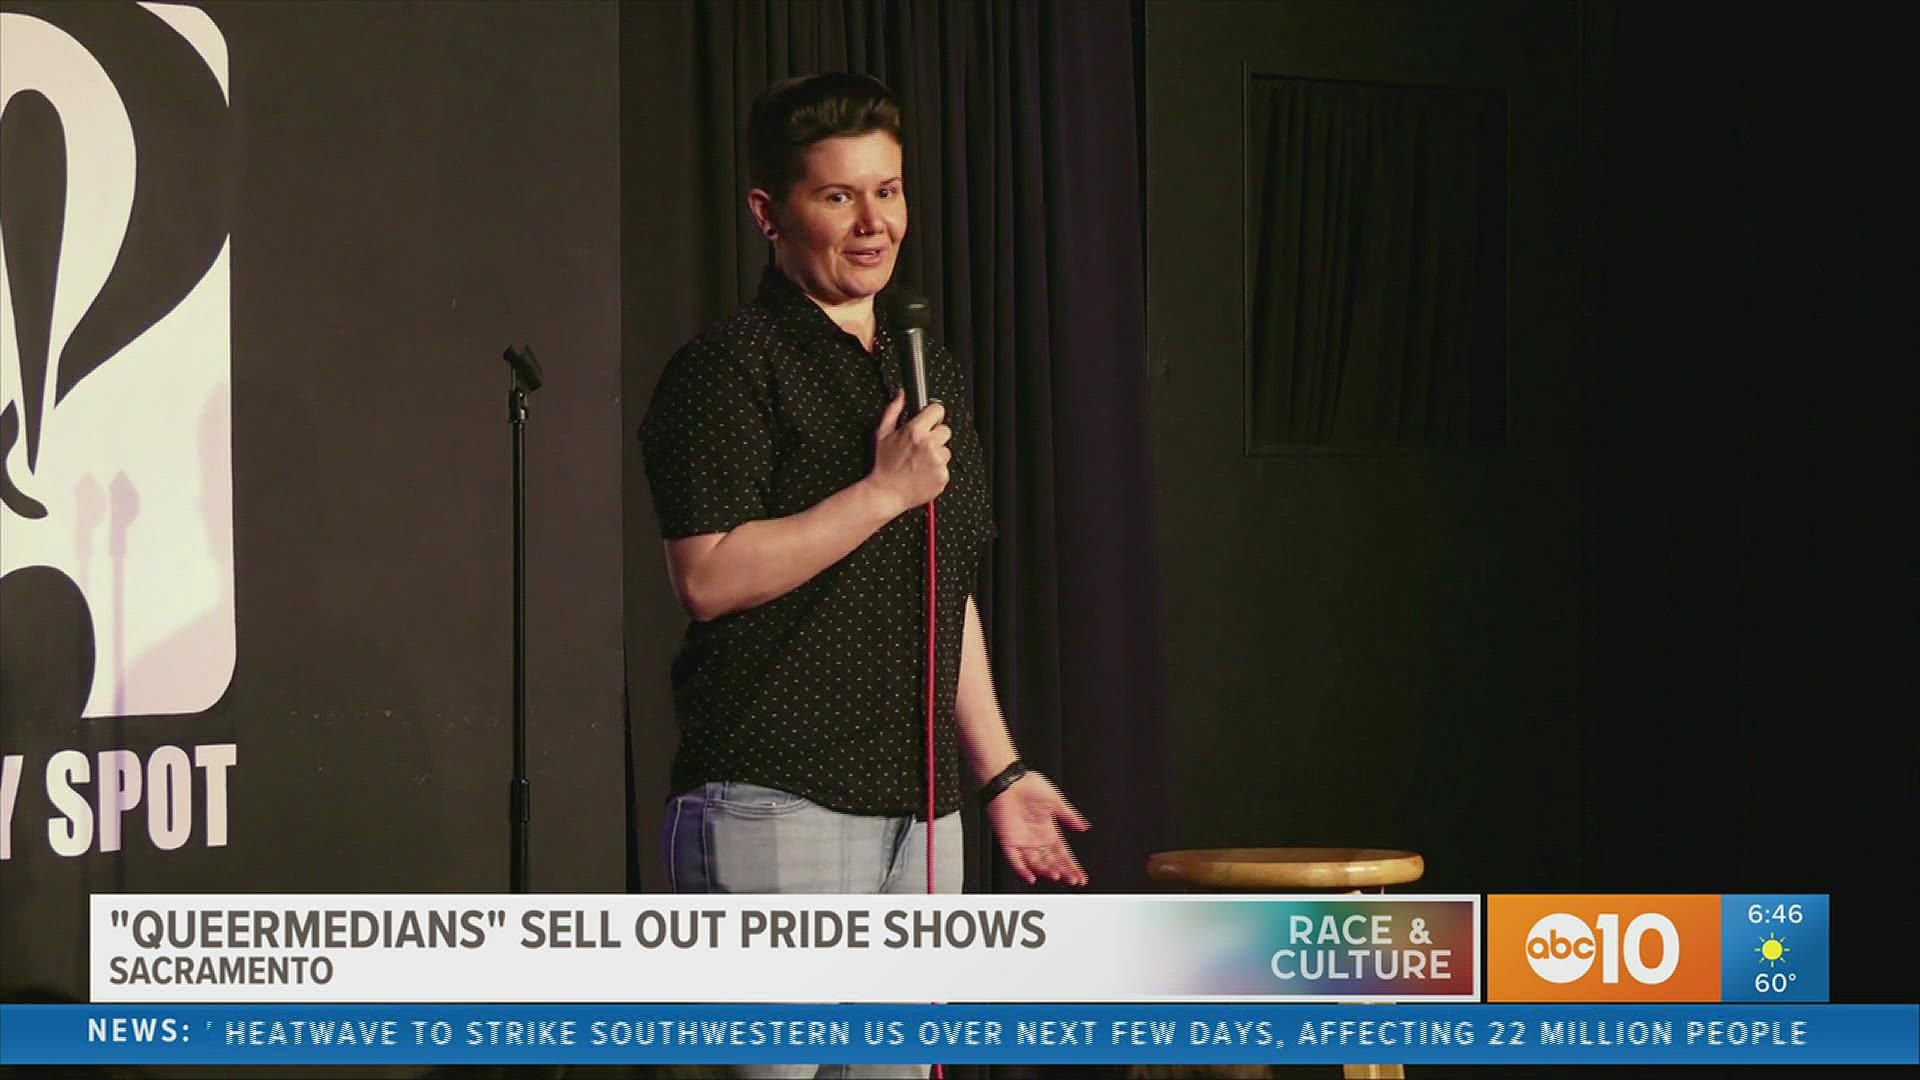 Queermedians, based in Sacramento, features an all LGBTQ lineup of stand-up comics.